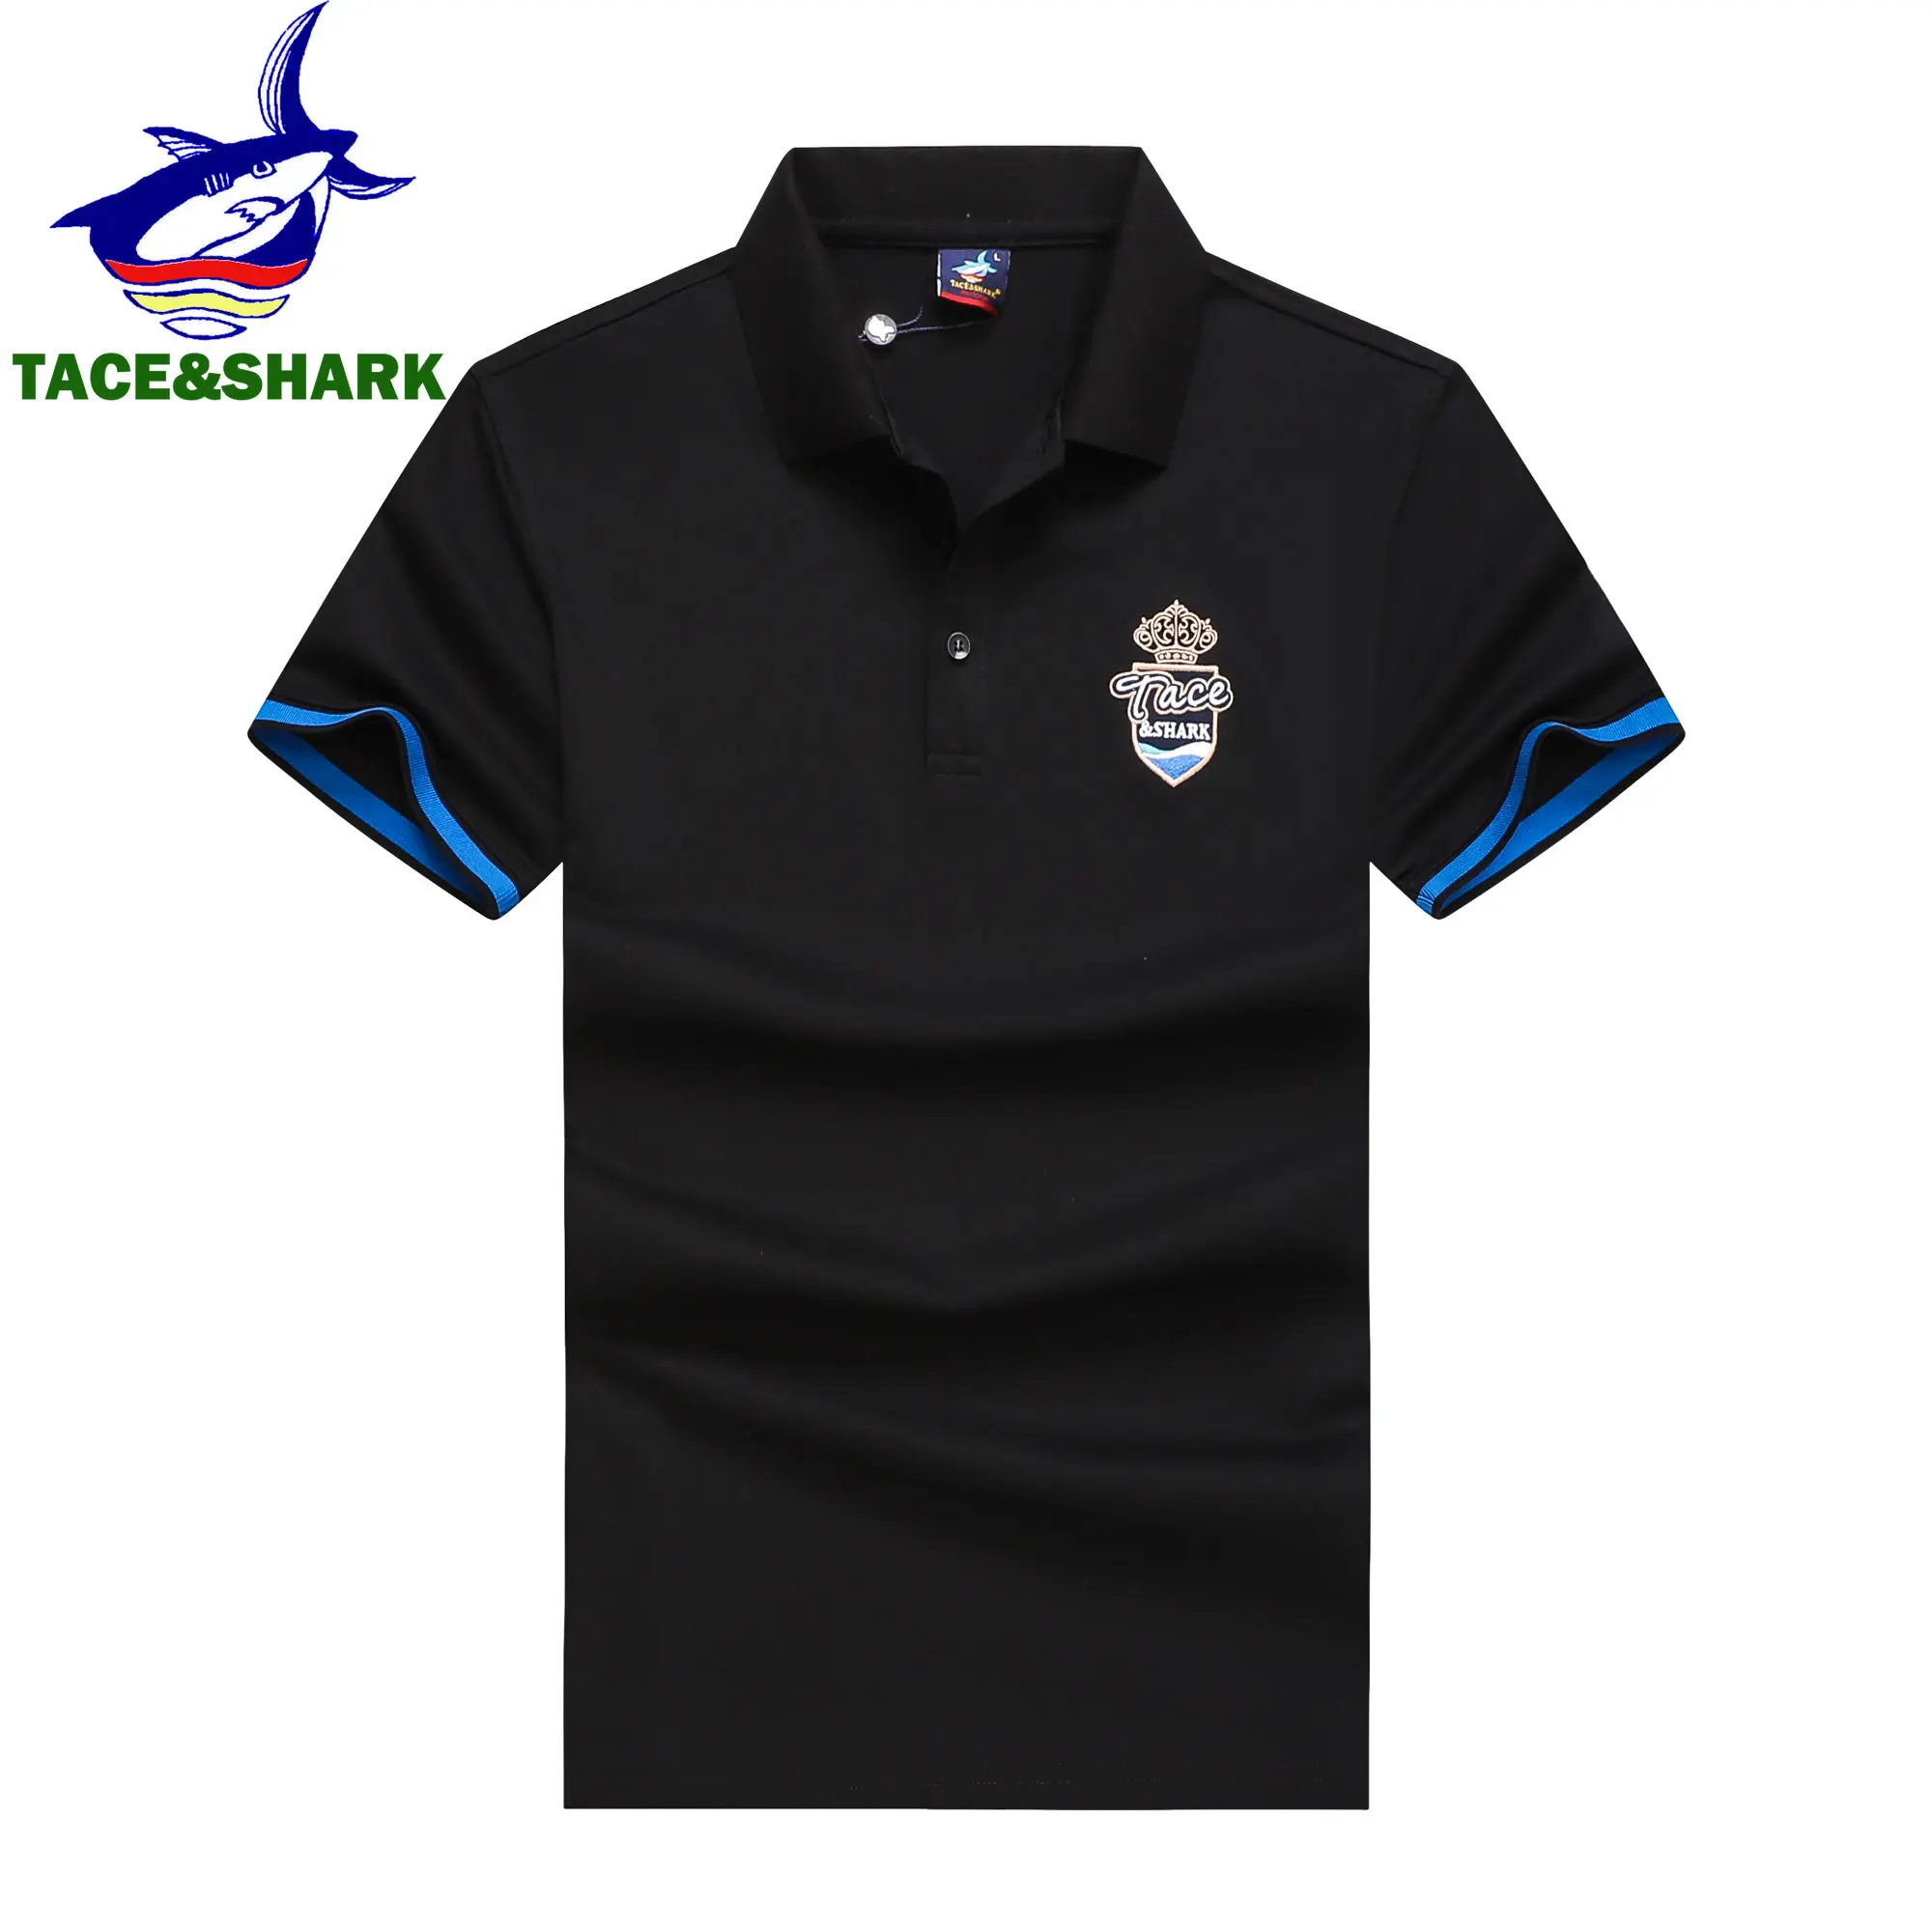 

TACE&SHARK New Arrival Brand Black Clothing Shark Embroidery Polo Shirt Men Solid Color Fashion Striped Sleeve Business Polos